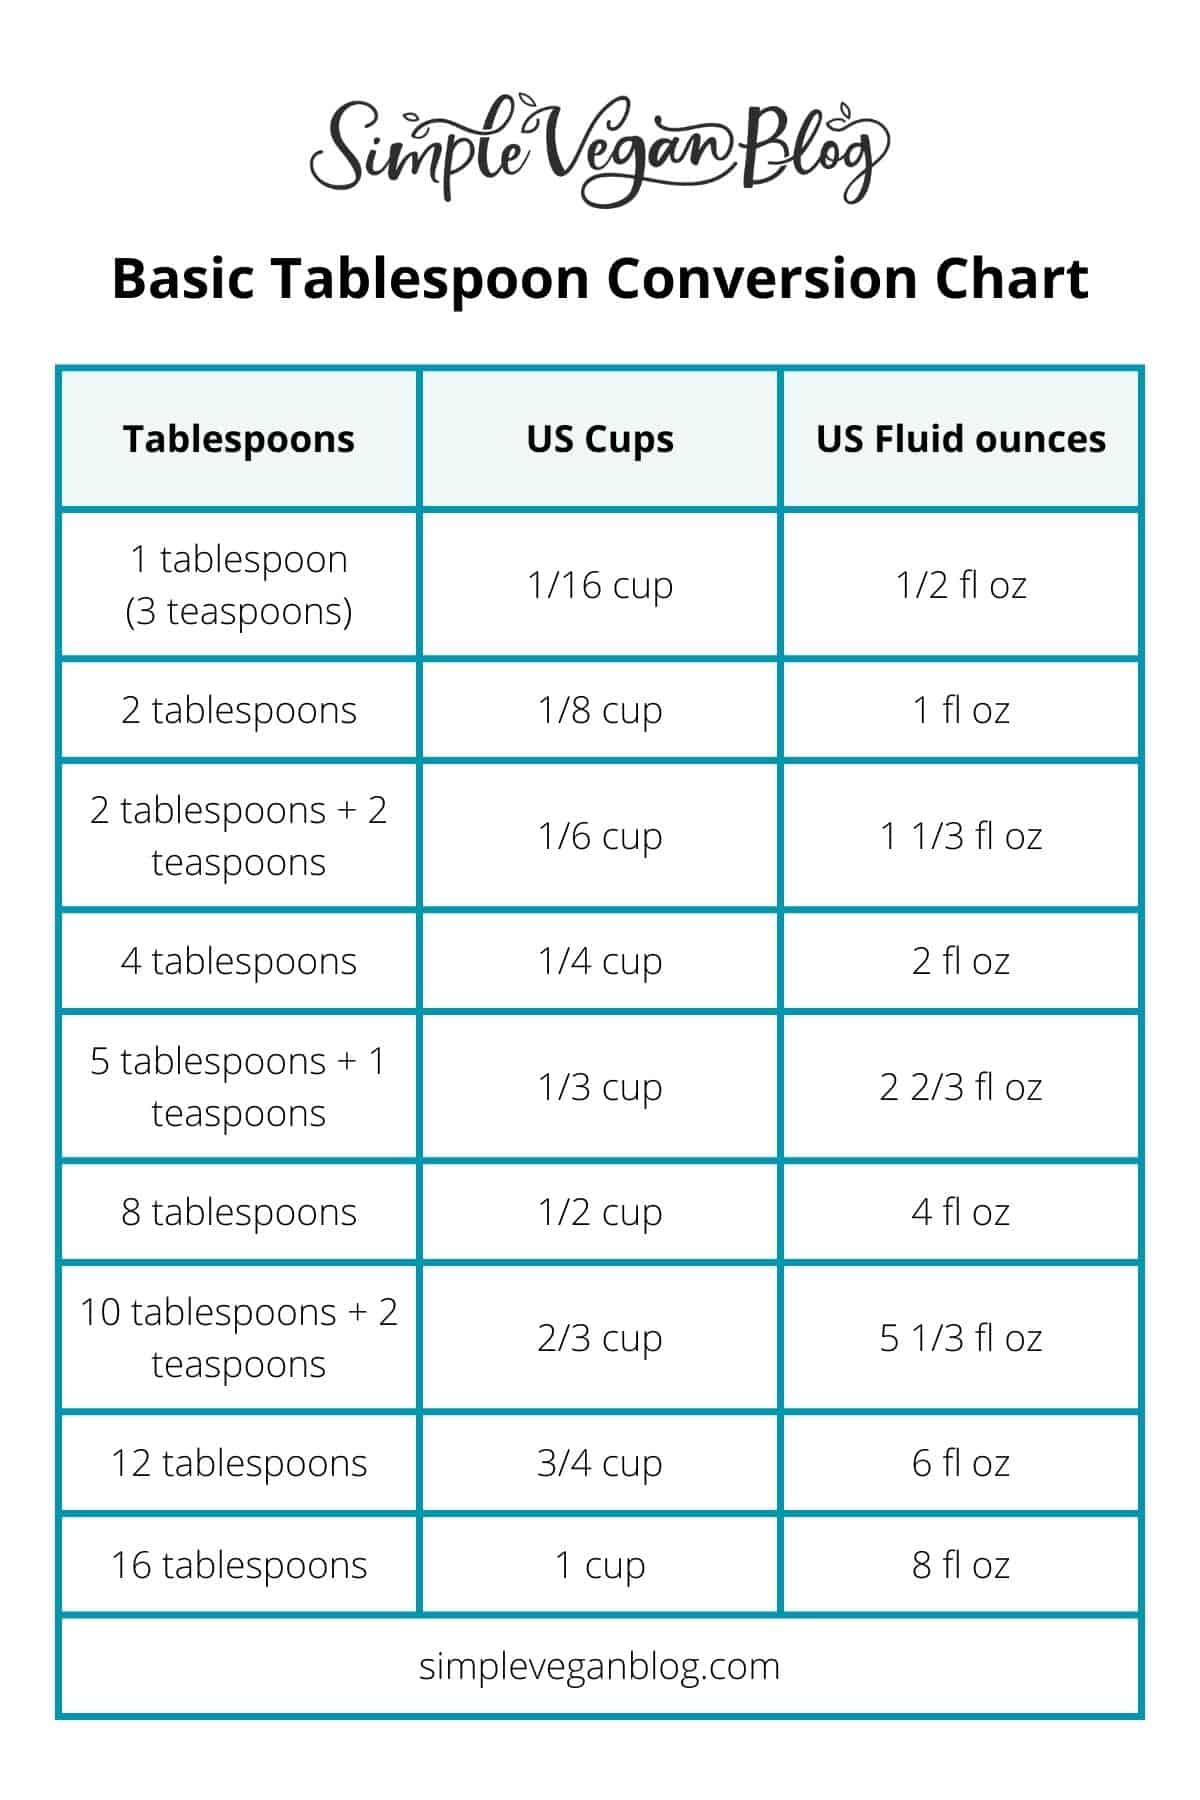 Tablespoons to cups conversion chart.